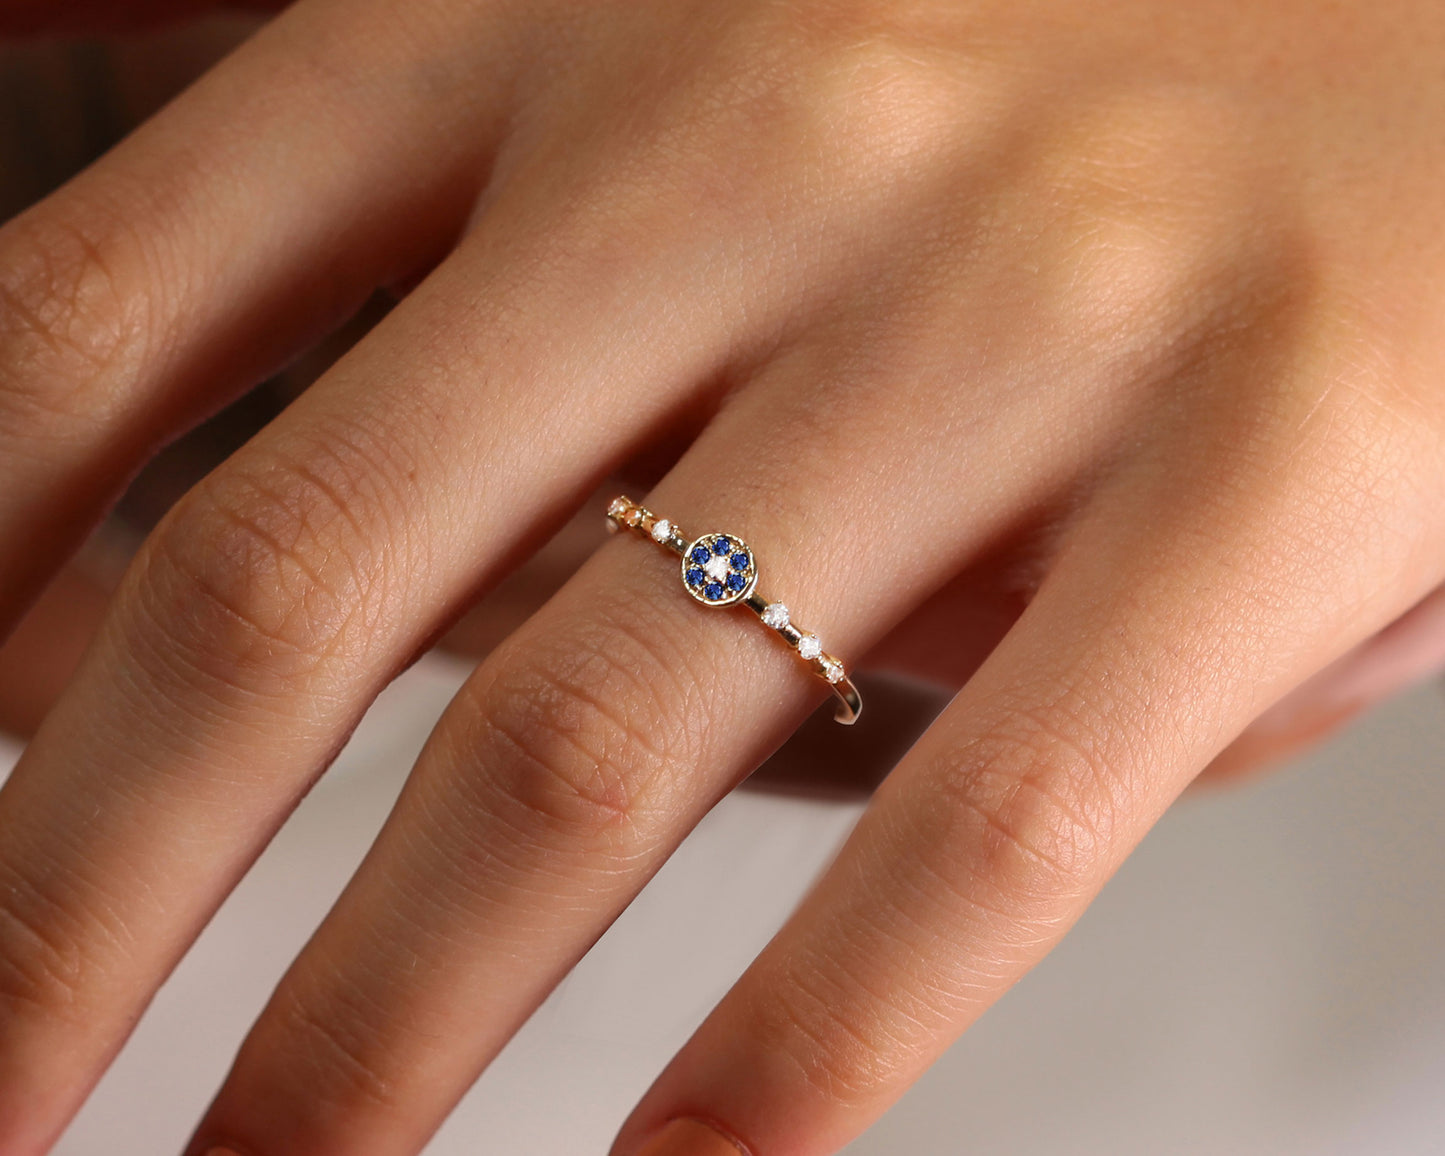 14K Yellow Solid Gold Ring,Multi Stone Ring,Halo Setting Round Cut Sapphire Ring